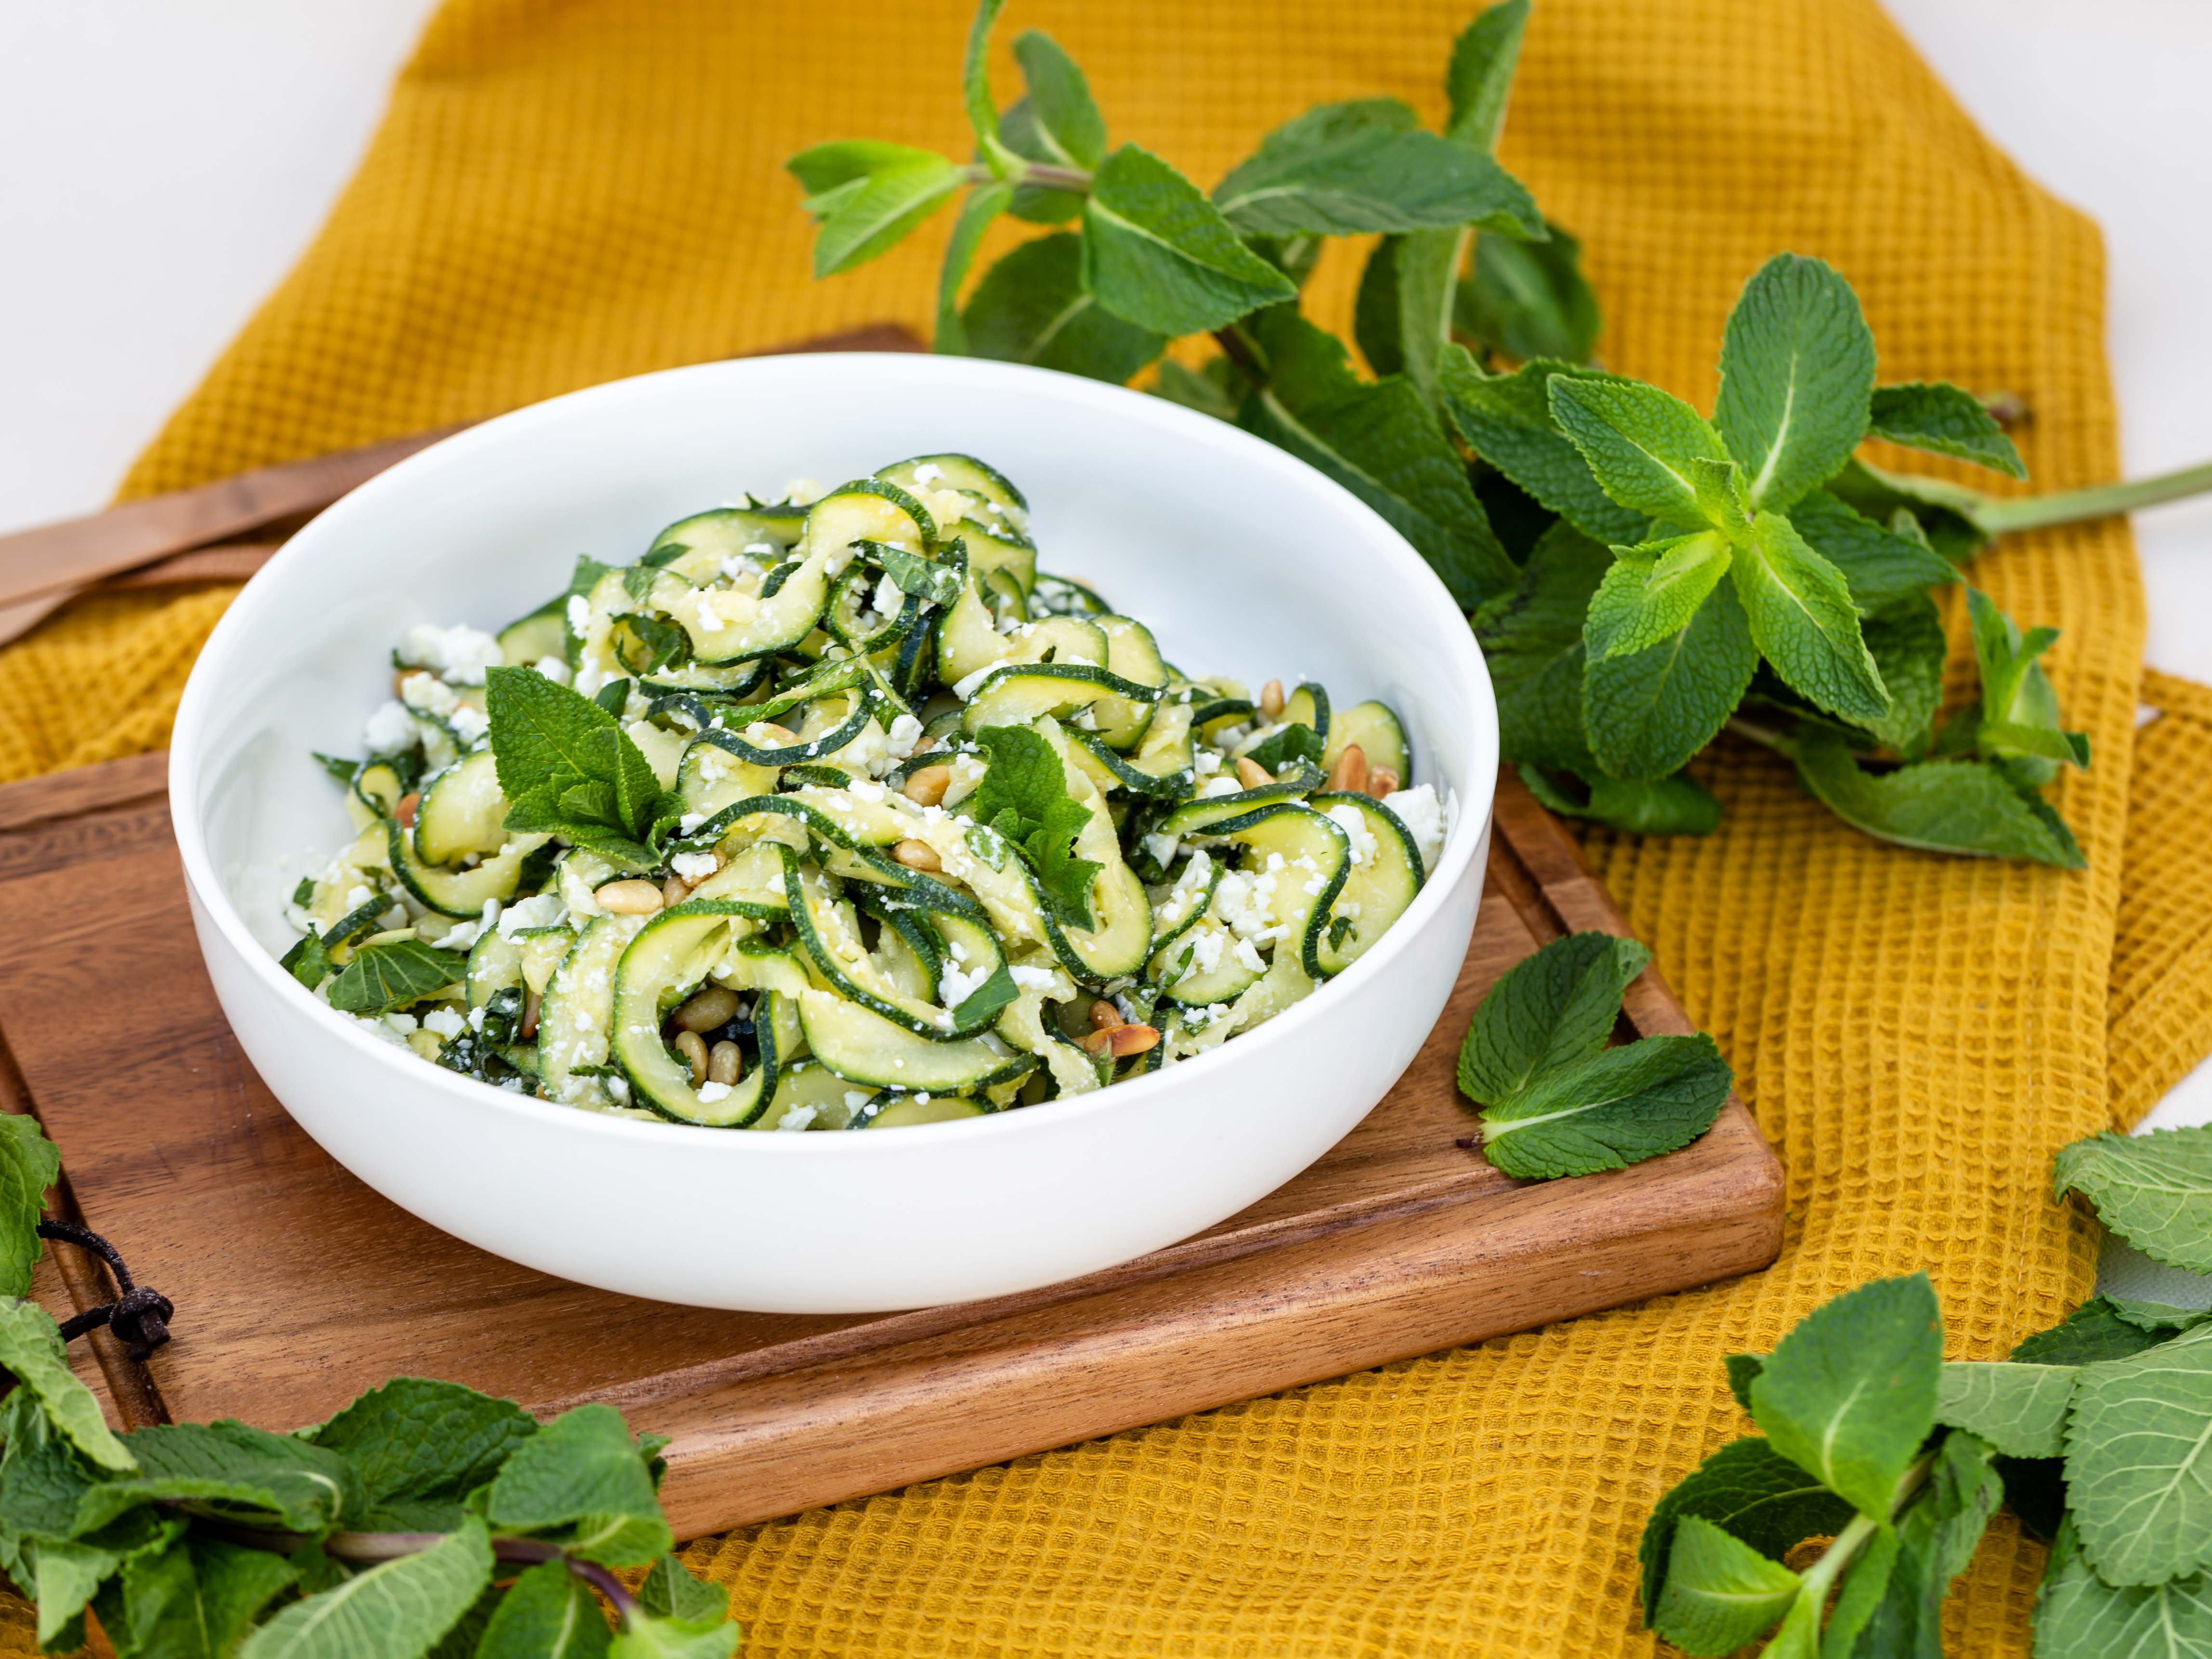 https://freethepickle.fr/wp-content/uploads/2019/05/Salade-courgettes-2-of-10.jpg